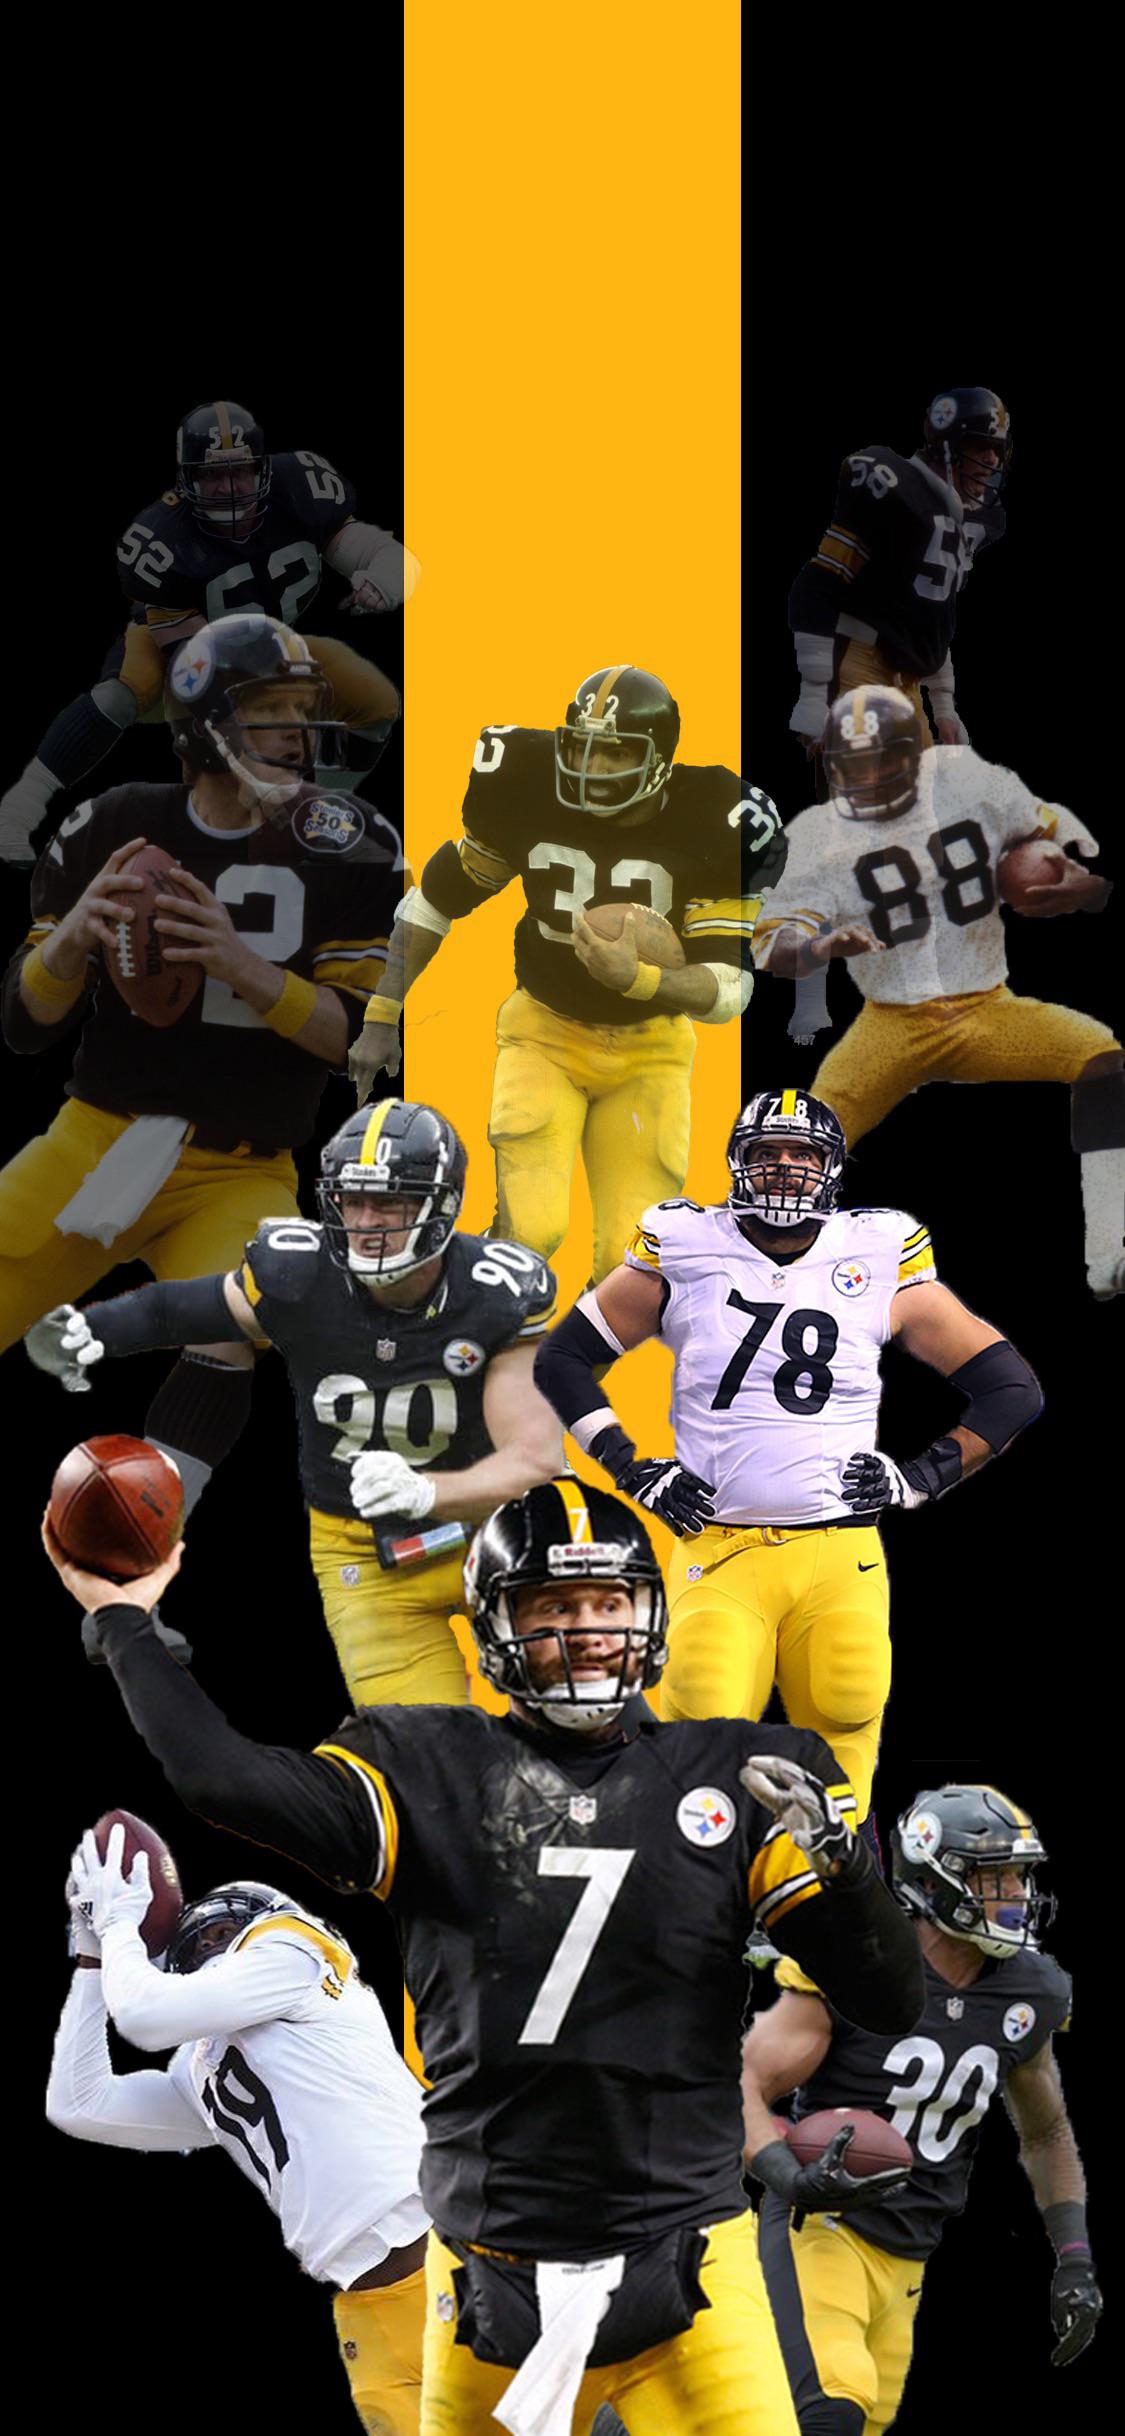 Wallpaper I made with some of my favorite past and present Steelers